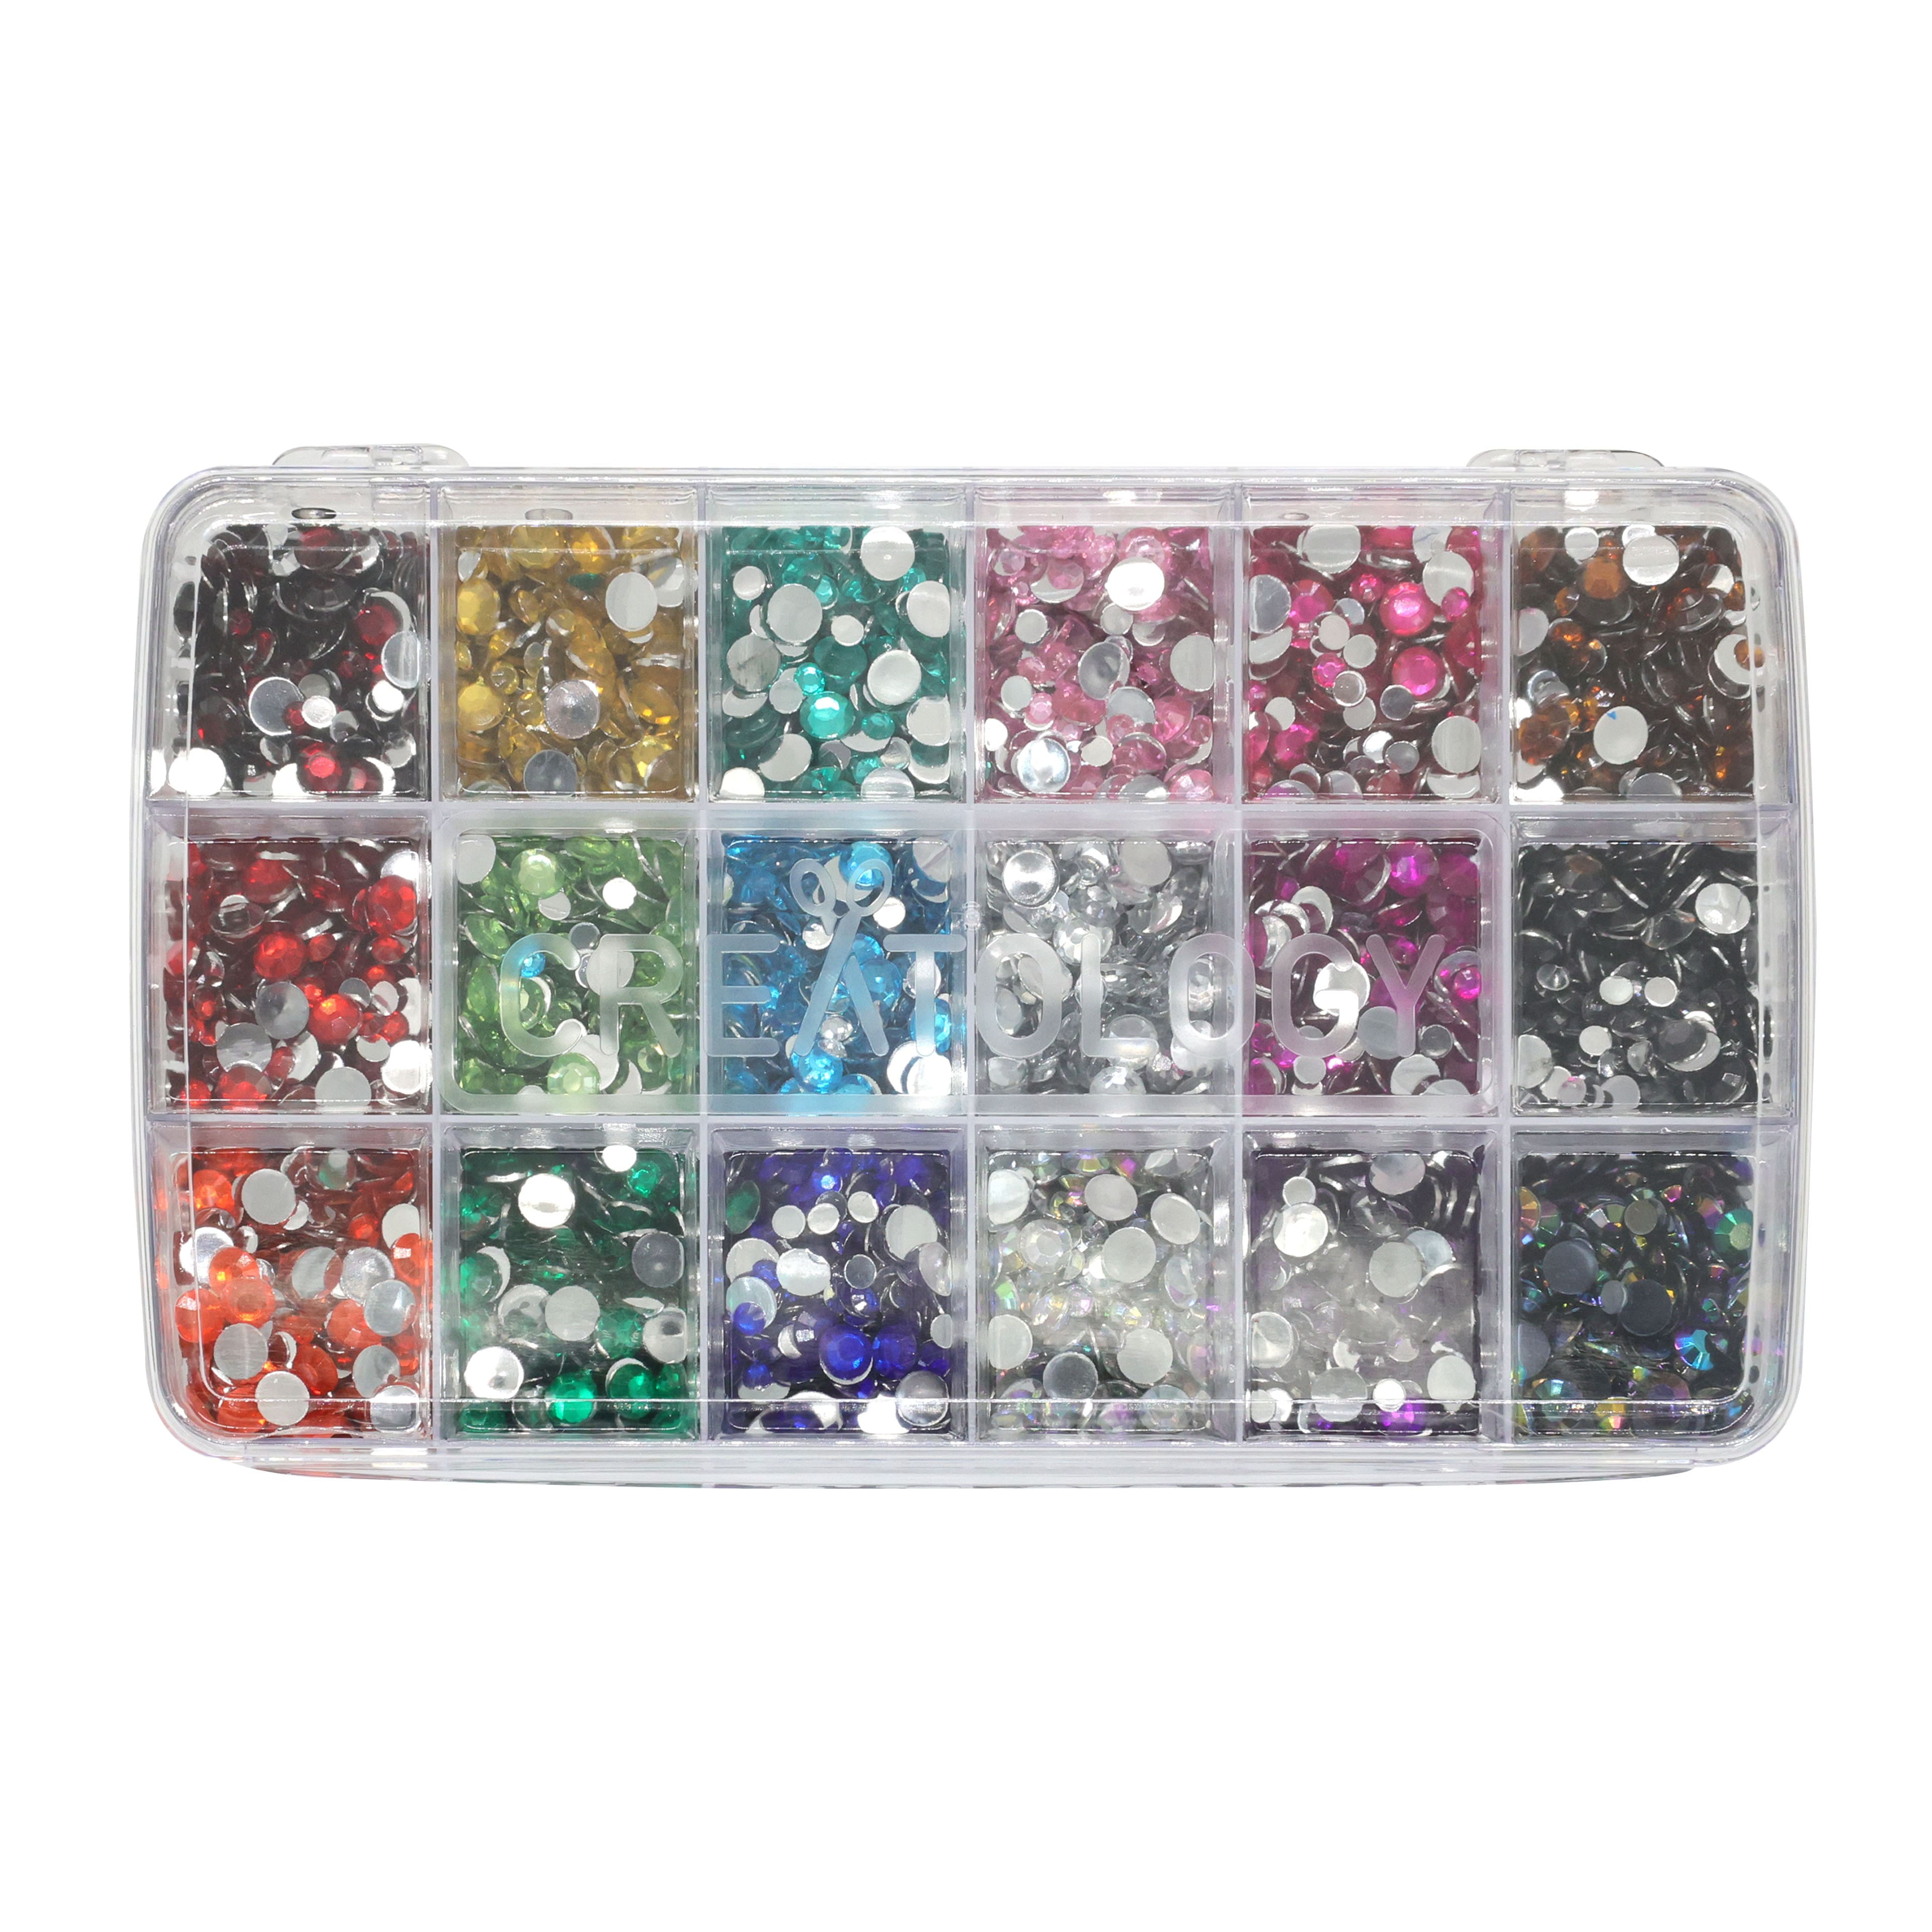 Aquabeads Mega Bead Refill Pack, Arts & Crafts Bead Refill Kit for Children  - over 2,400 beads and shooting star storage case